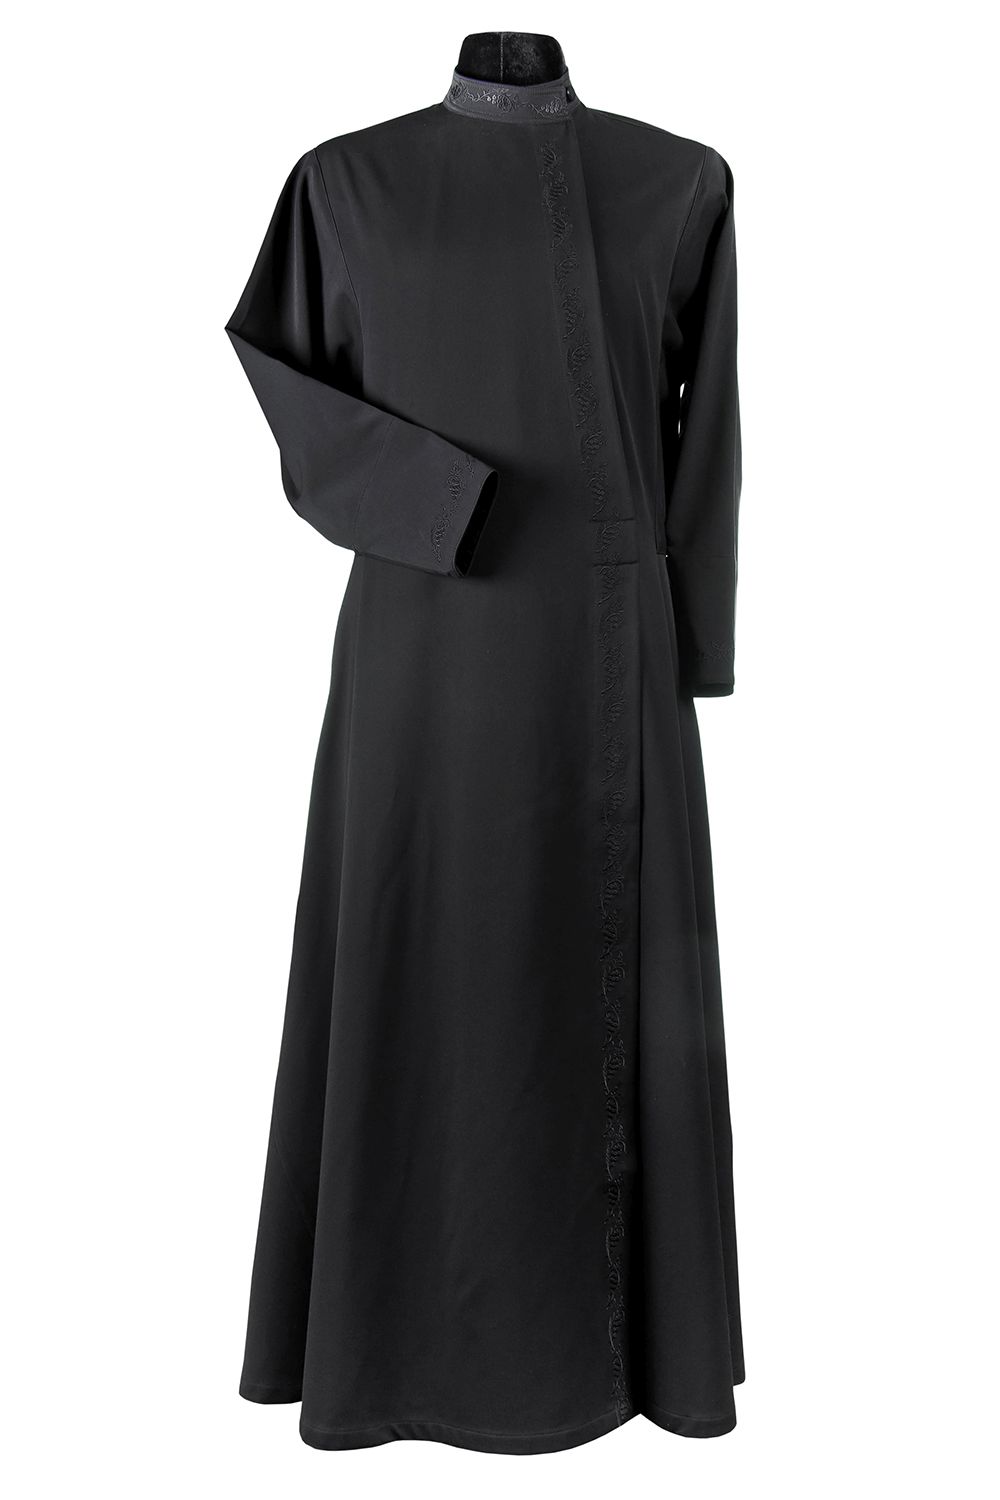 Men's Russian style Cassock embroidered